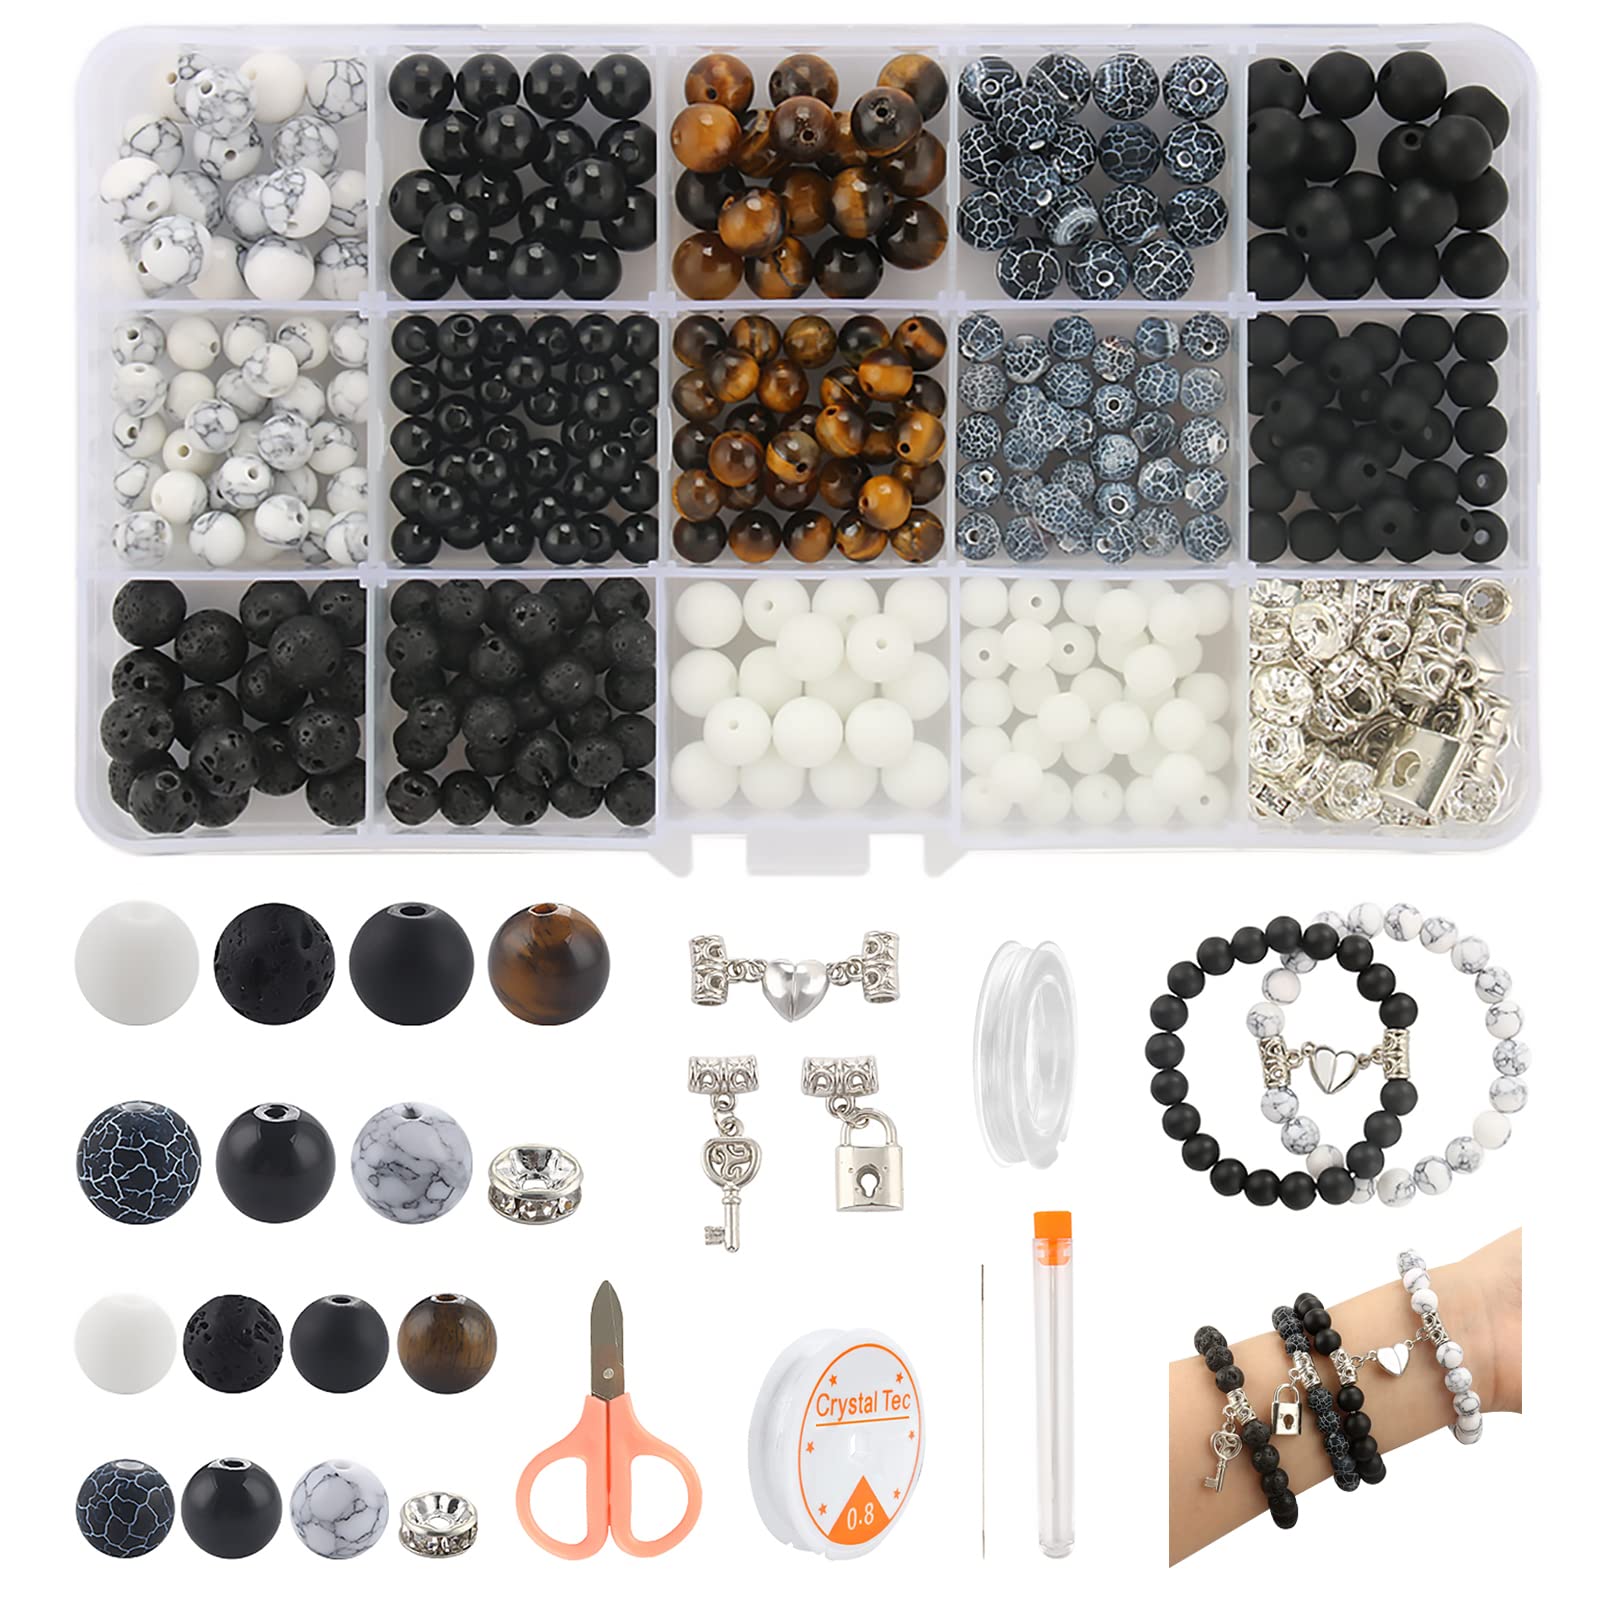 Mchruie Stone Beads for Jewelry Making Charm Bracelet Making Kit